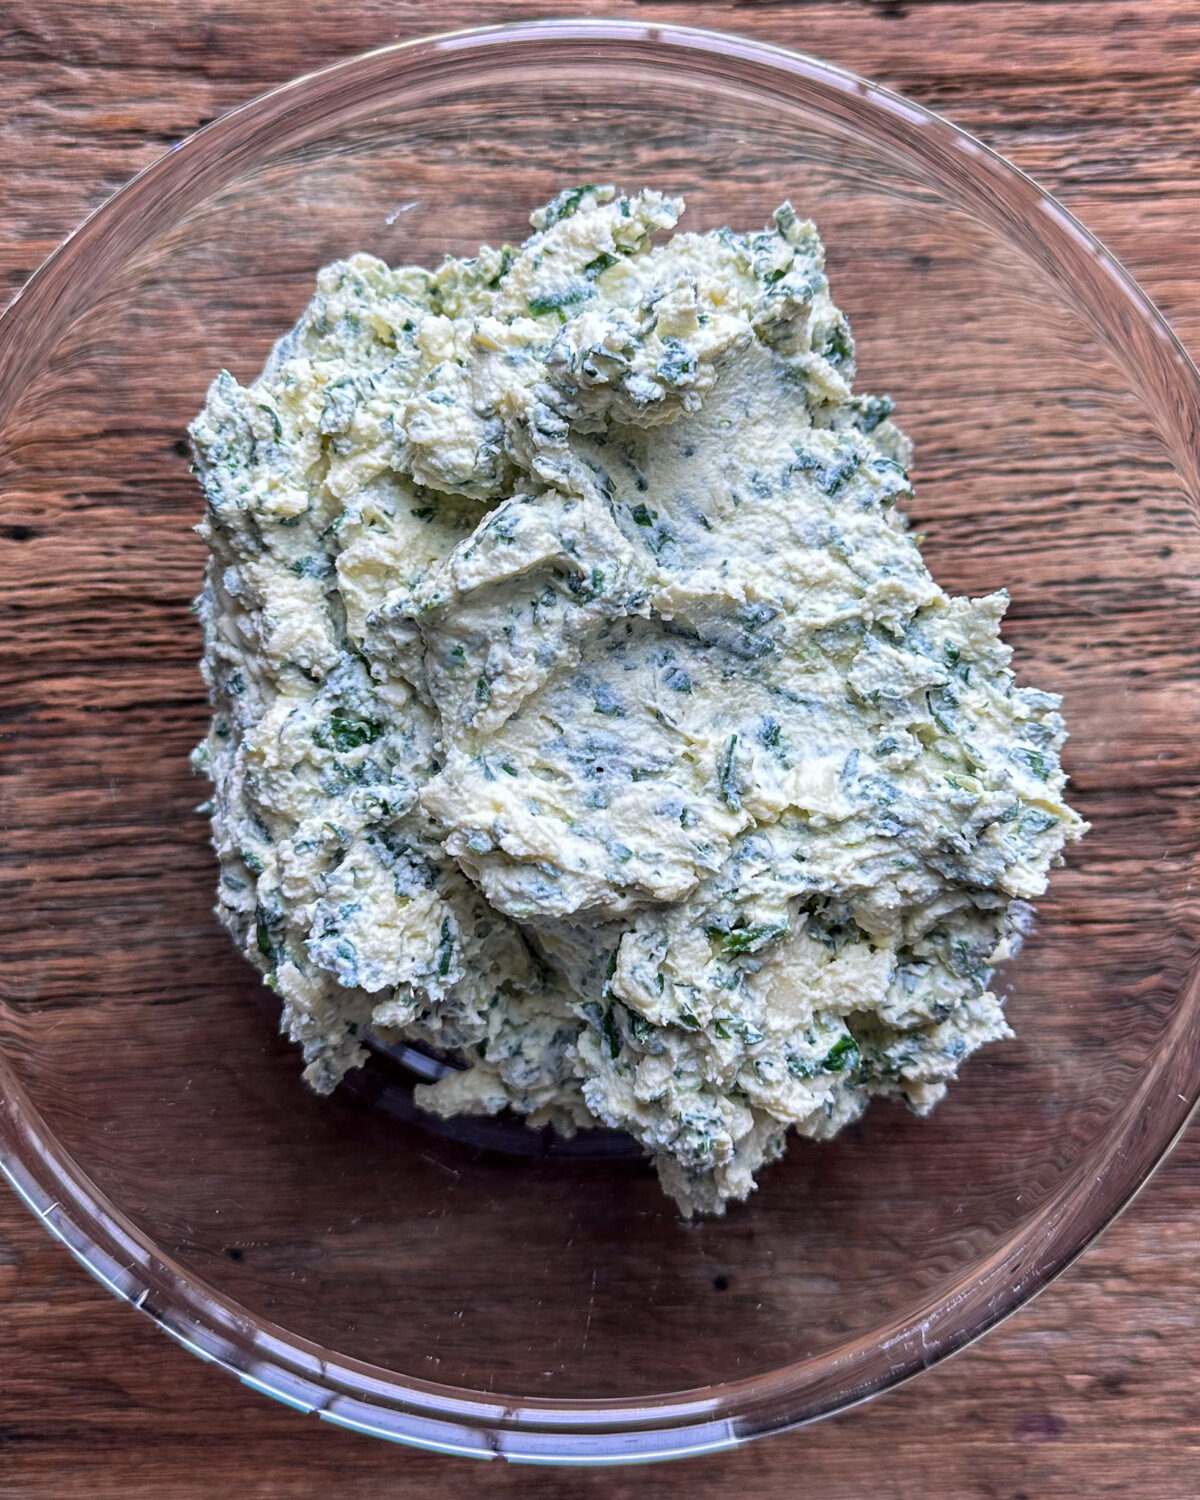 Ricotta with spinach mixture for a Lasagna with Bacon and Sausage.